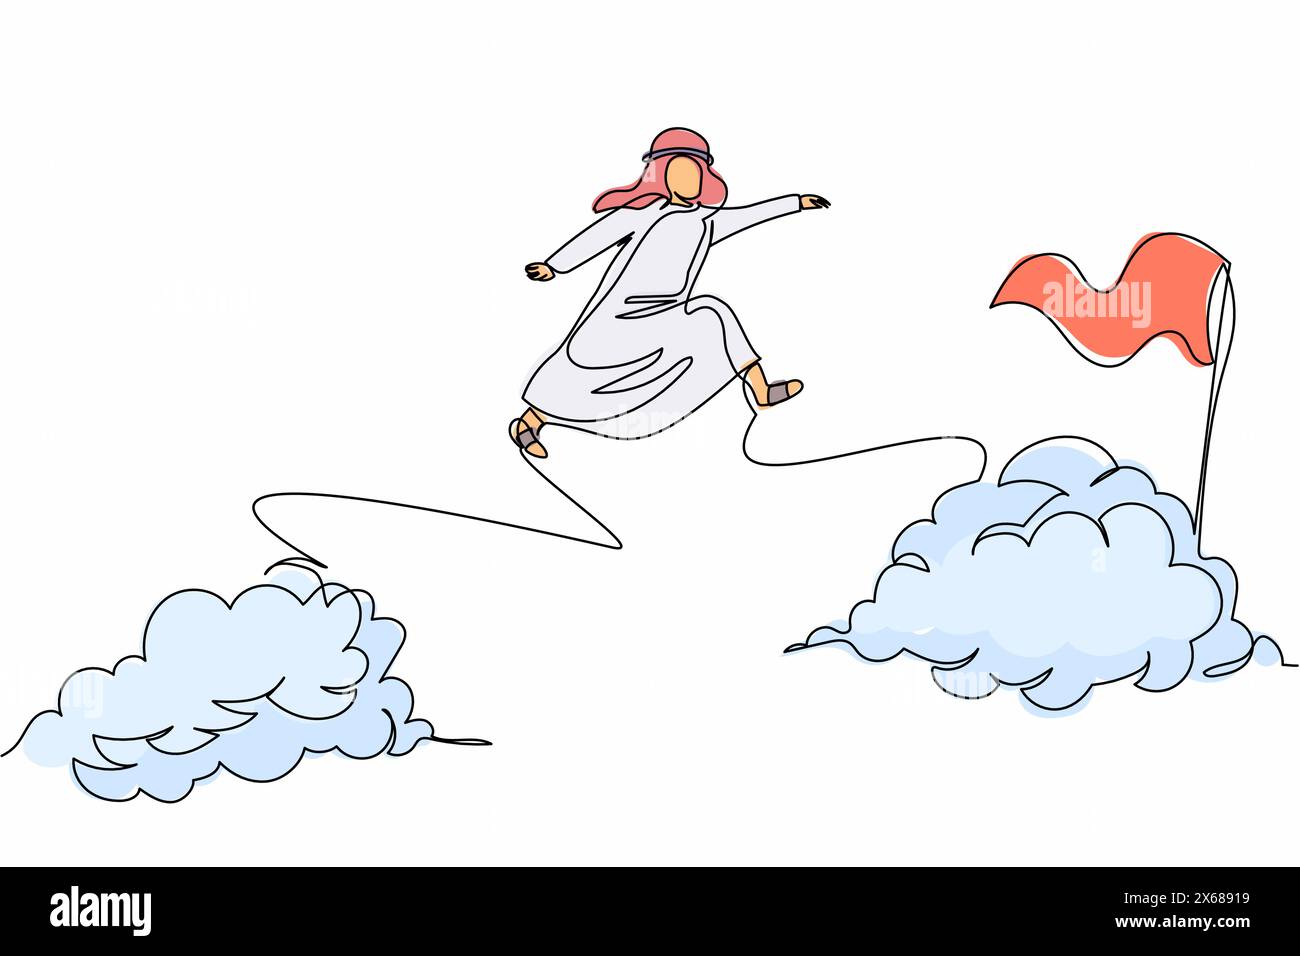 Single continuous line drawing Arab businessman jump over clouds to reach success, target or flag. Challenge career path. Taking risk business project Stock Vector